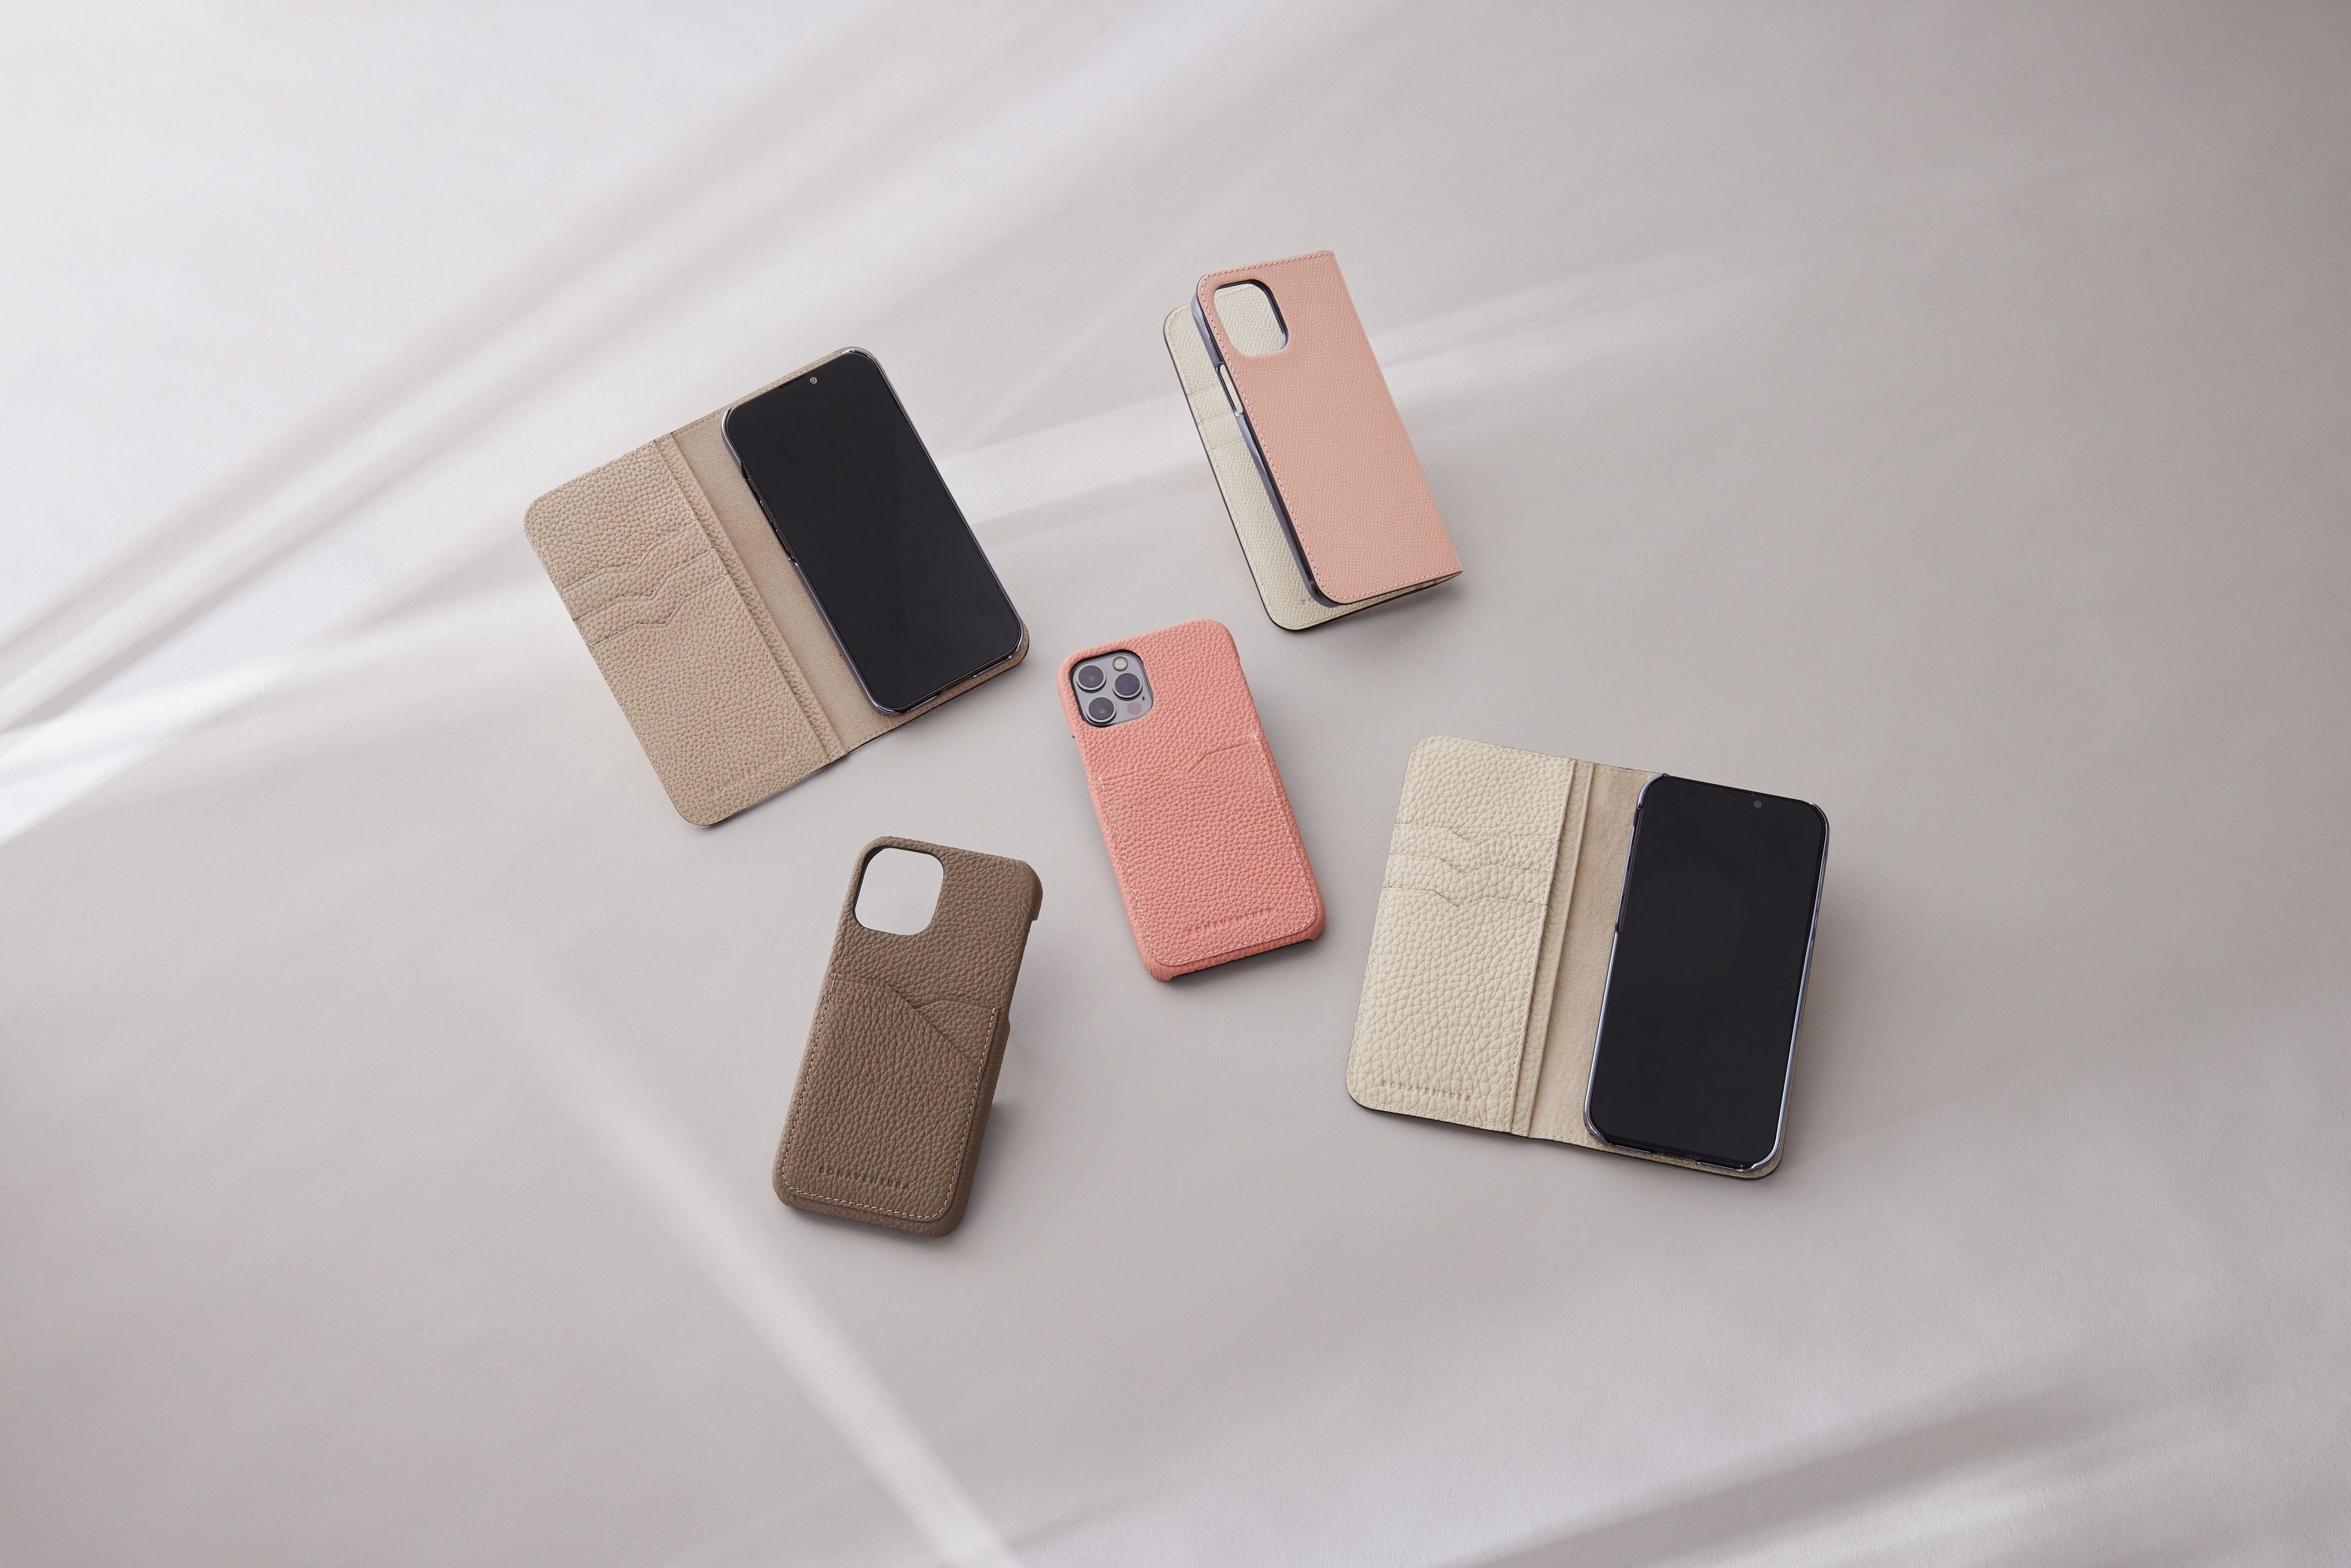 Various exclusive iPhone cases from BONAVENTURA that illustrate the diversity of designs and materials.